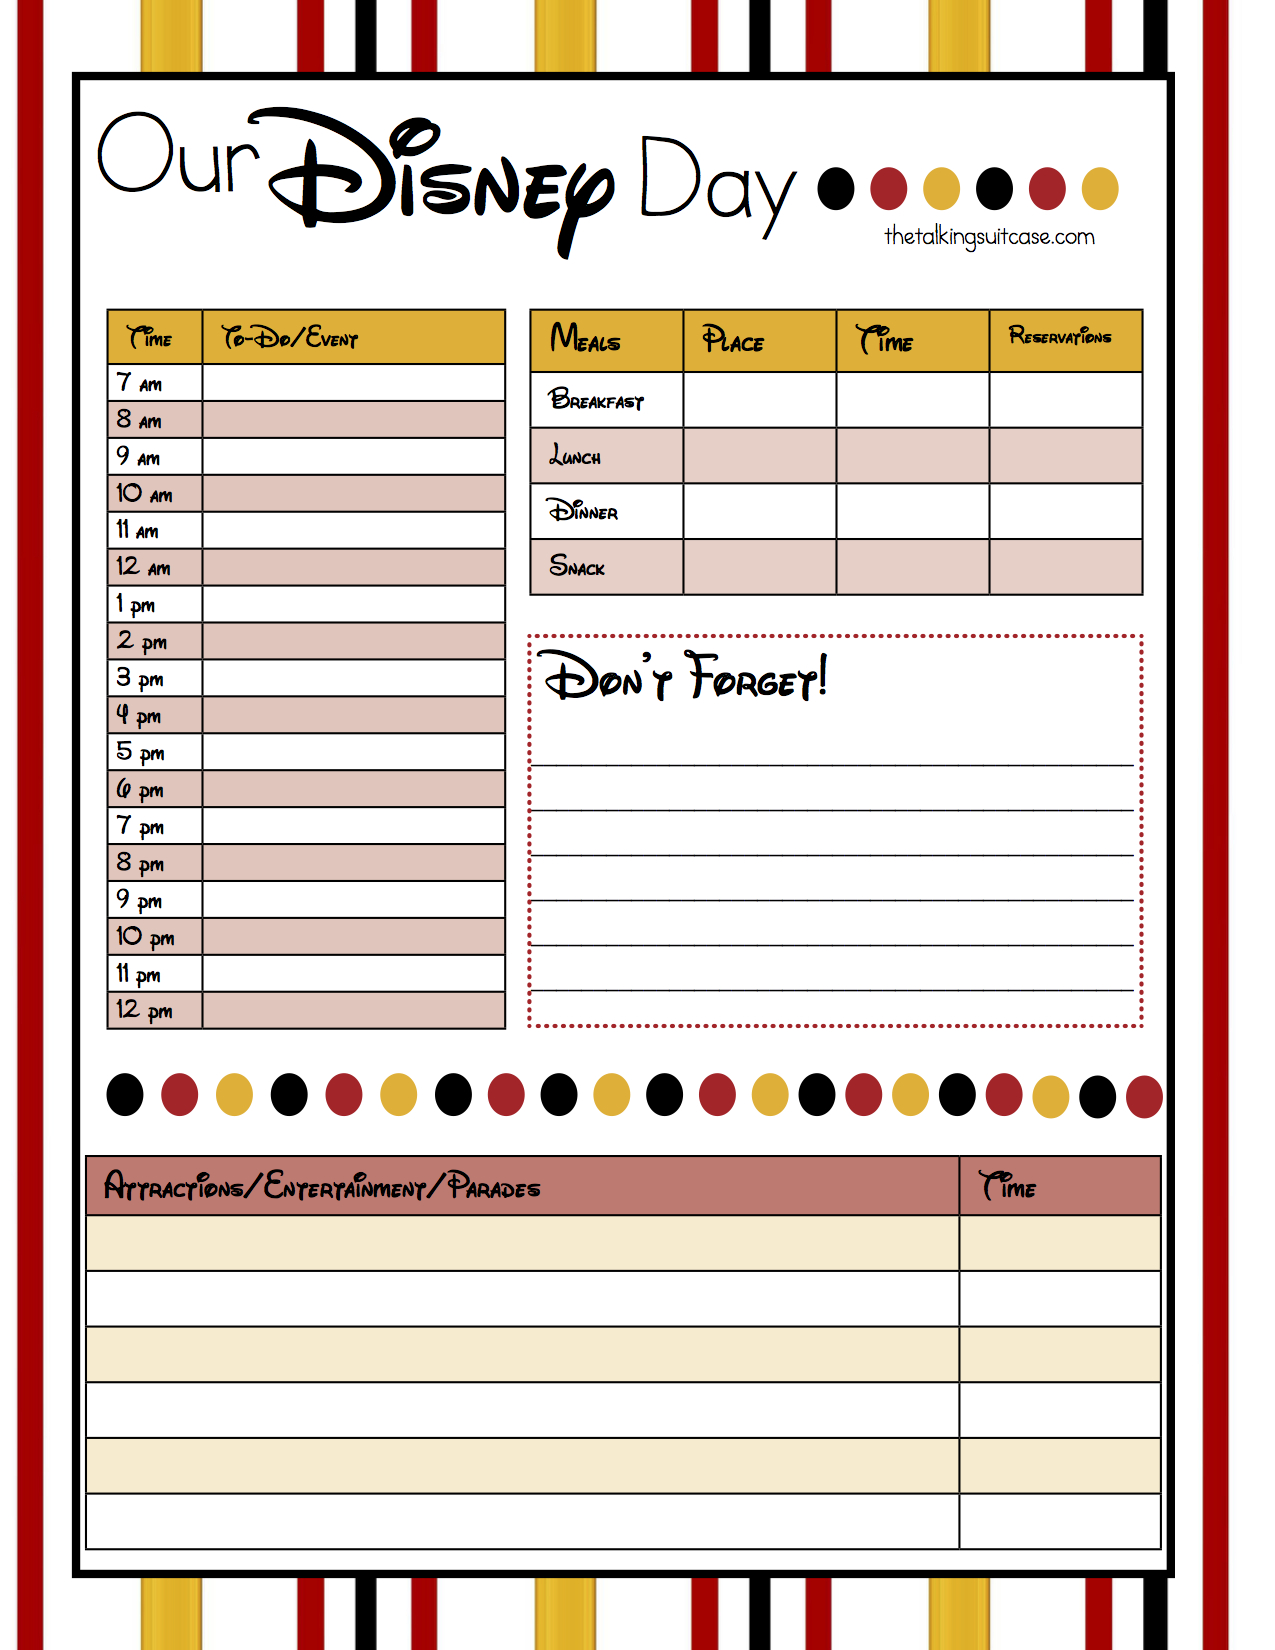 Get Ready For Your Disney Vacation - Free Printable Disney